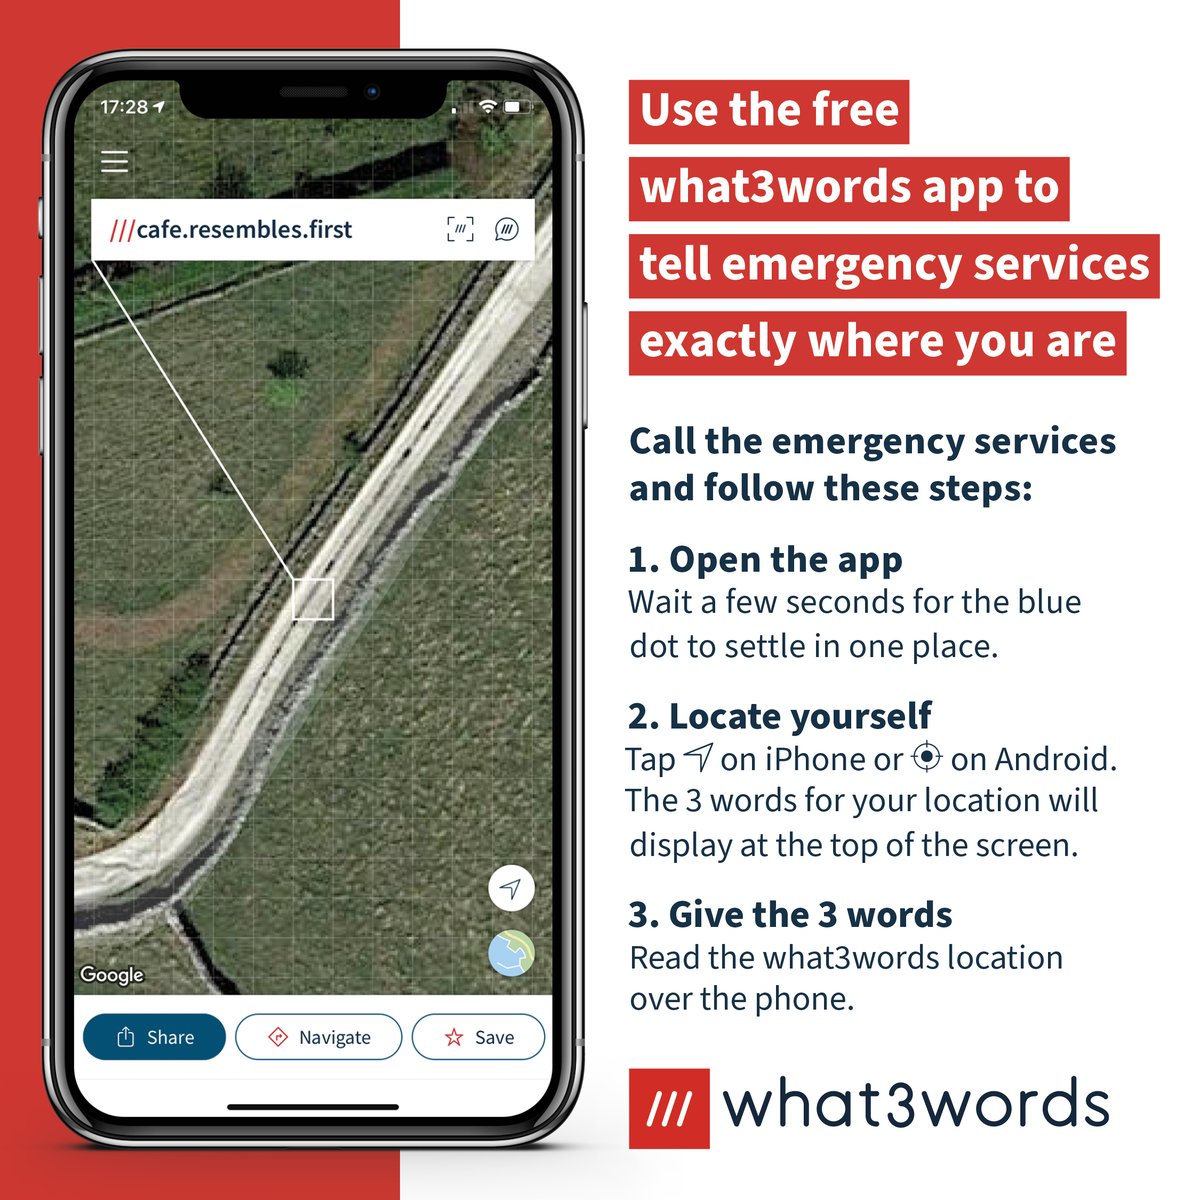 Need urgent medical help, but unsure of your location? @what3words is there to help when you don’t know your whereabouts. Download for free here: what3words.com/products/what3…